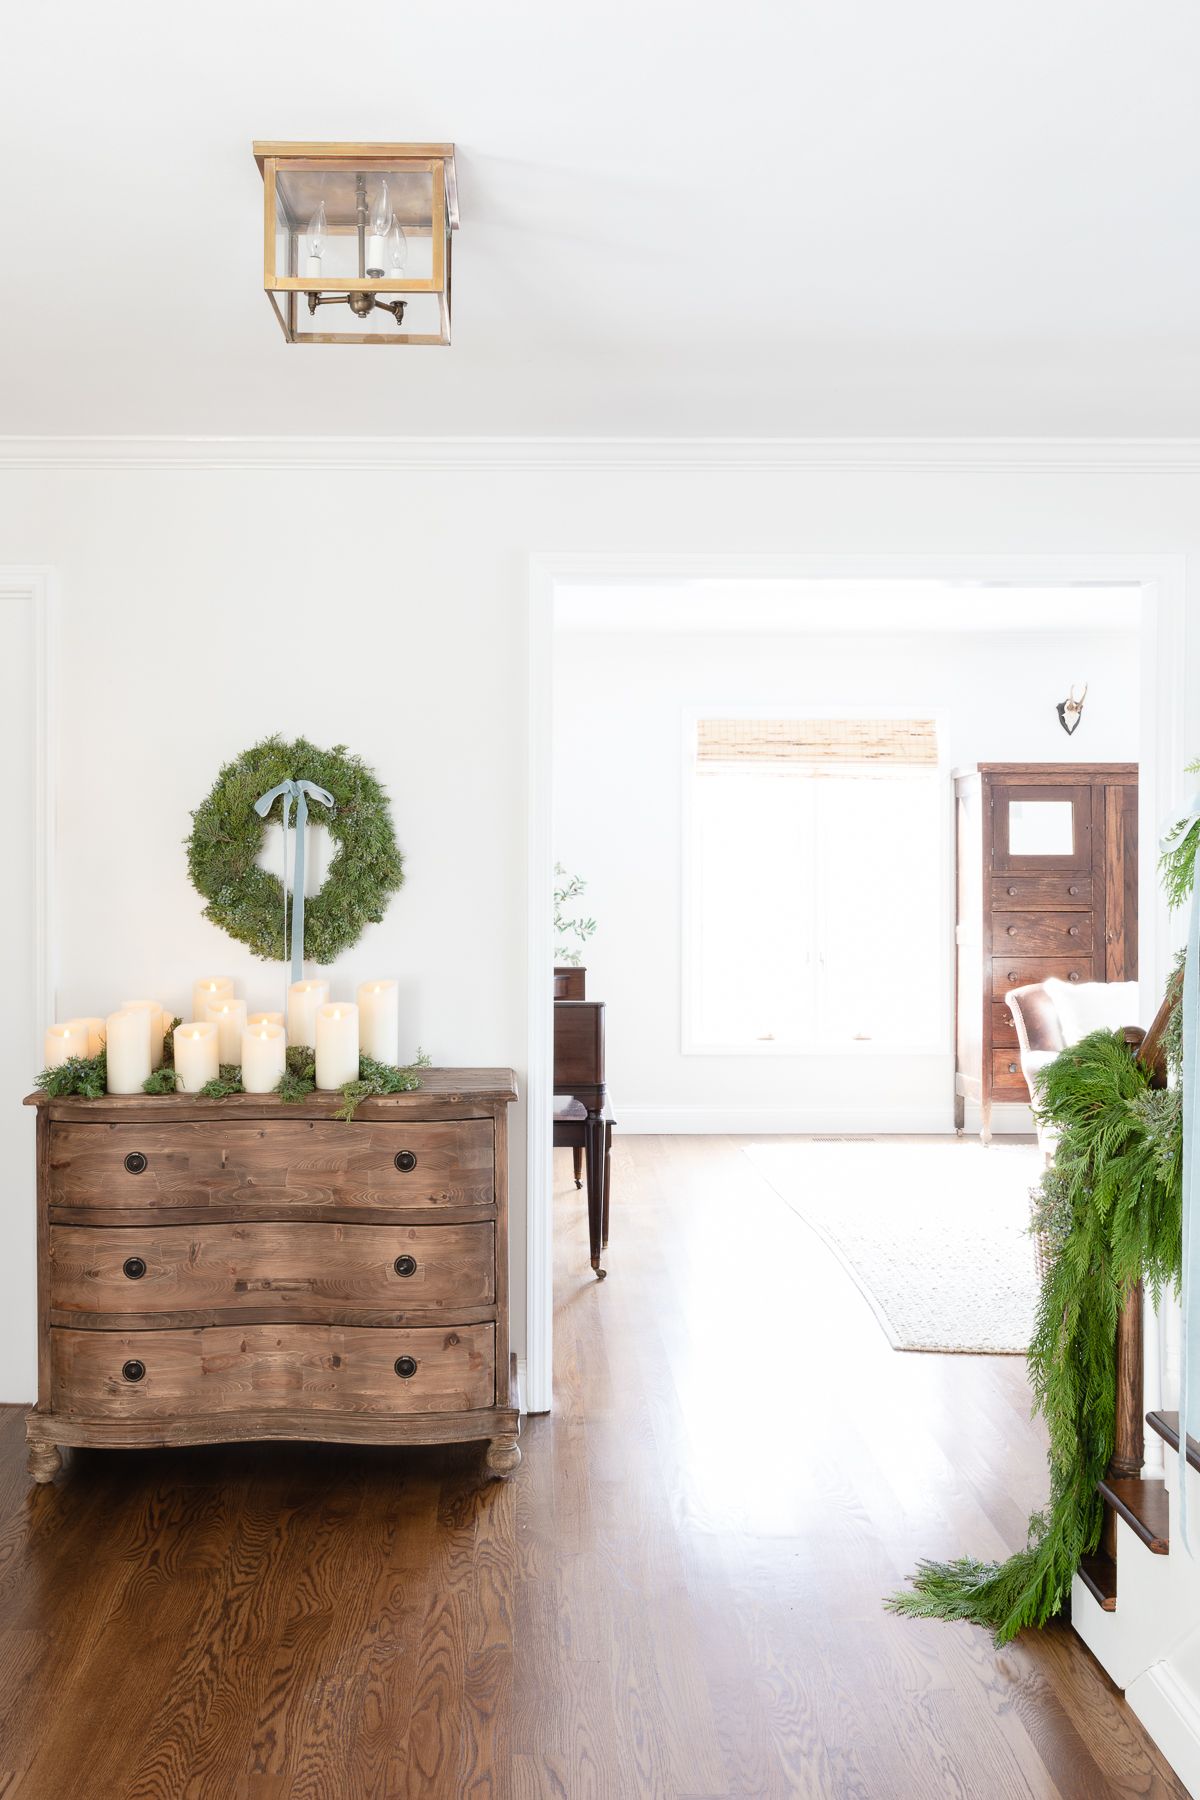 An entryway with a fresh cedar wreath on the stairs and a fresh wreath over a chest of drawers.